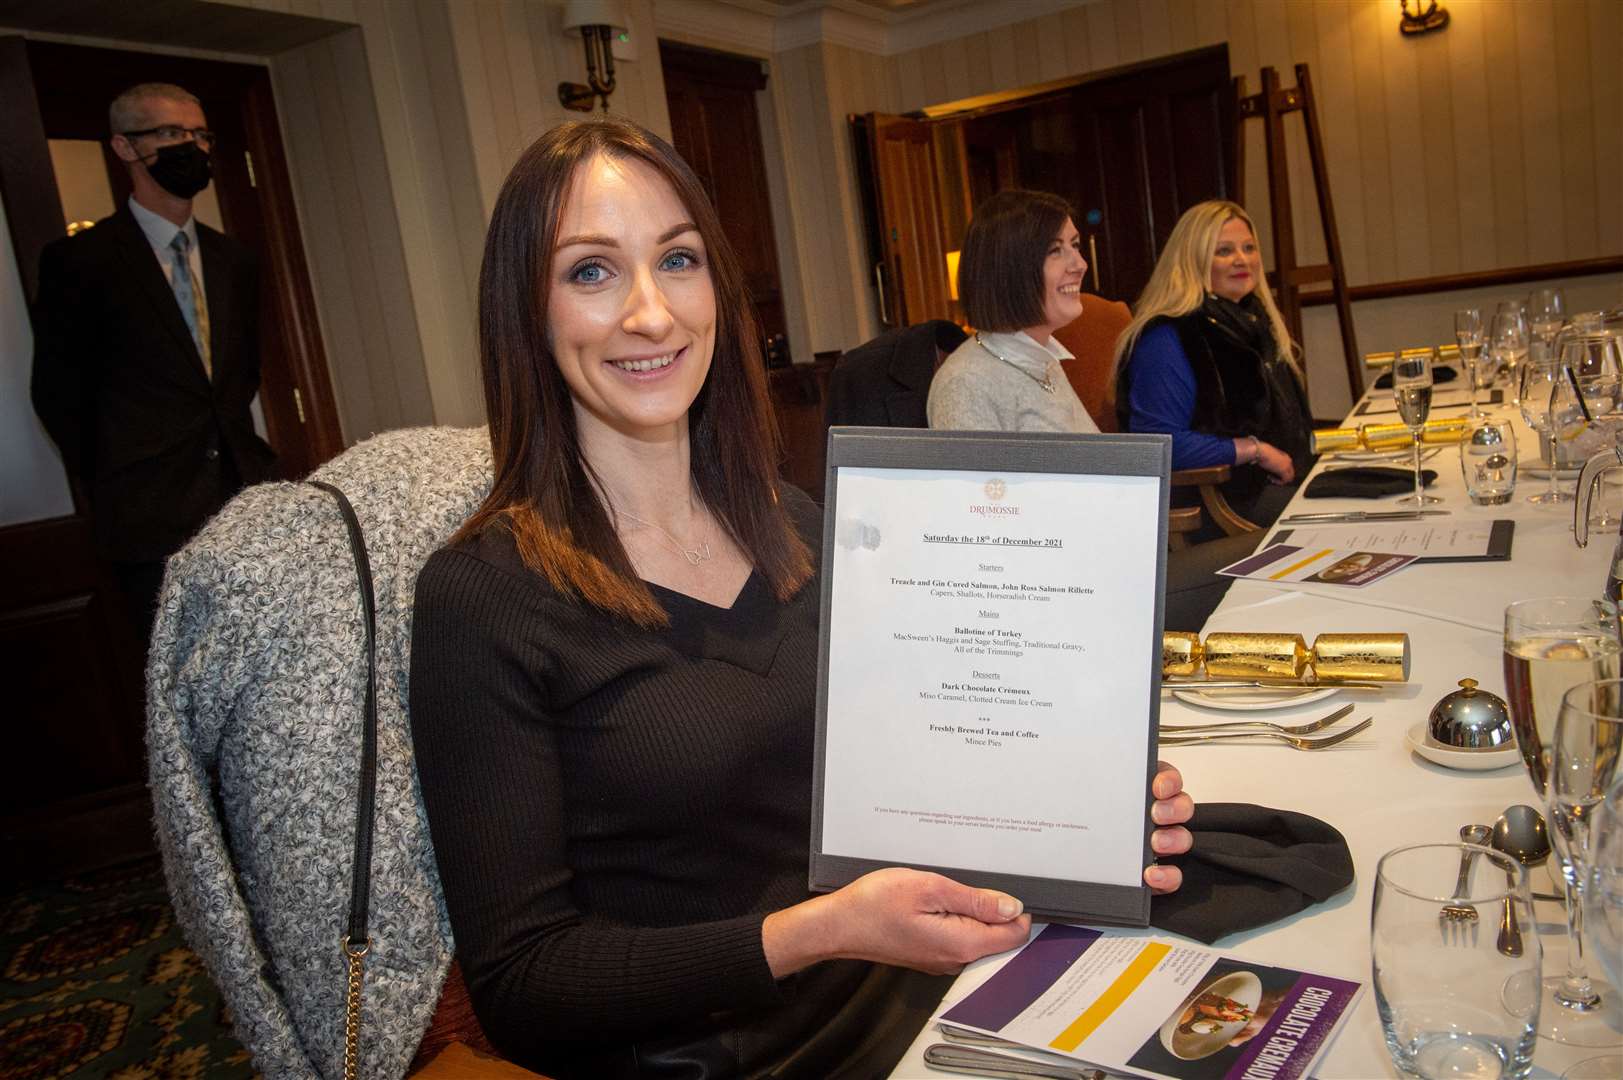 Competition winner Lindsay Dunlop at the Drumossie Hotel in Inverness.